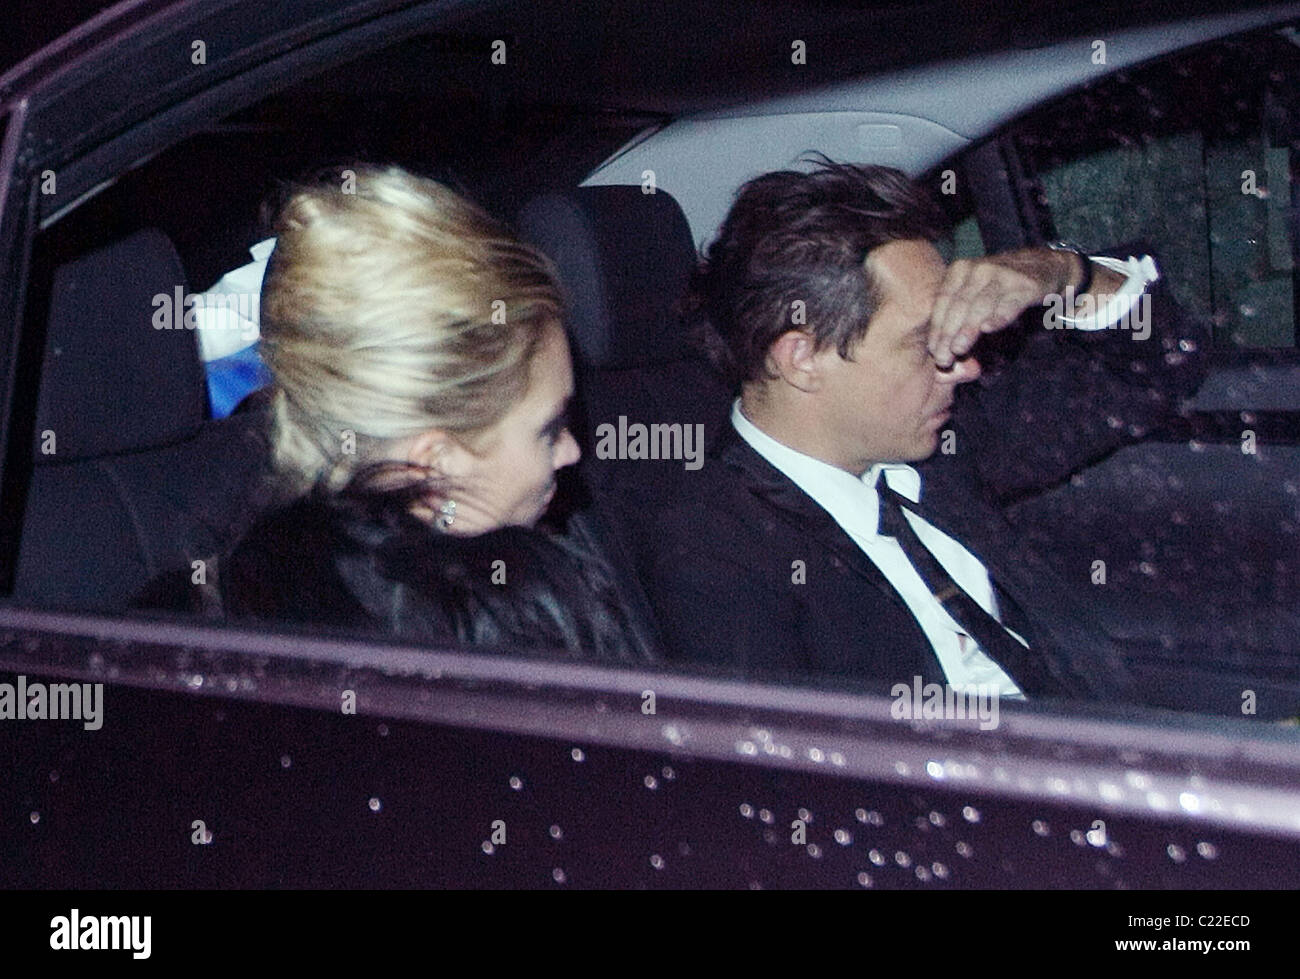 Jamie Hince And Kate Moss Leaving Simon Cowells Birthday Party At 3am Hince Appeared To Be